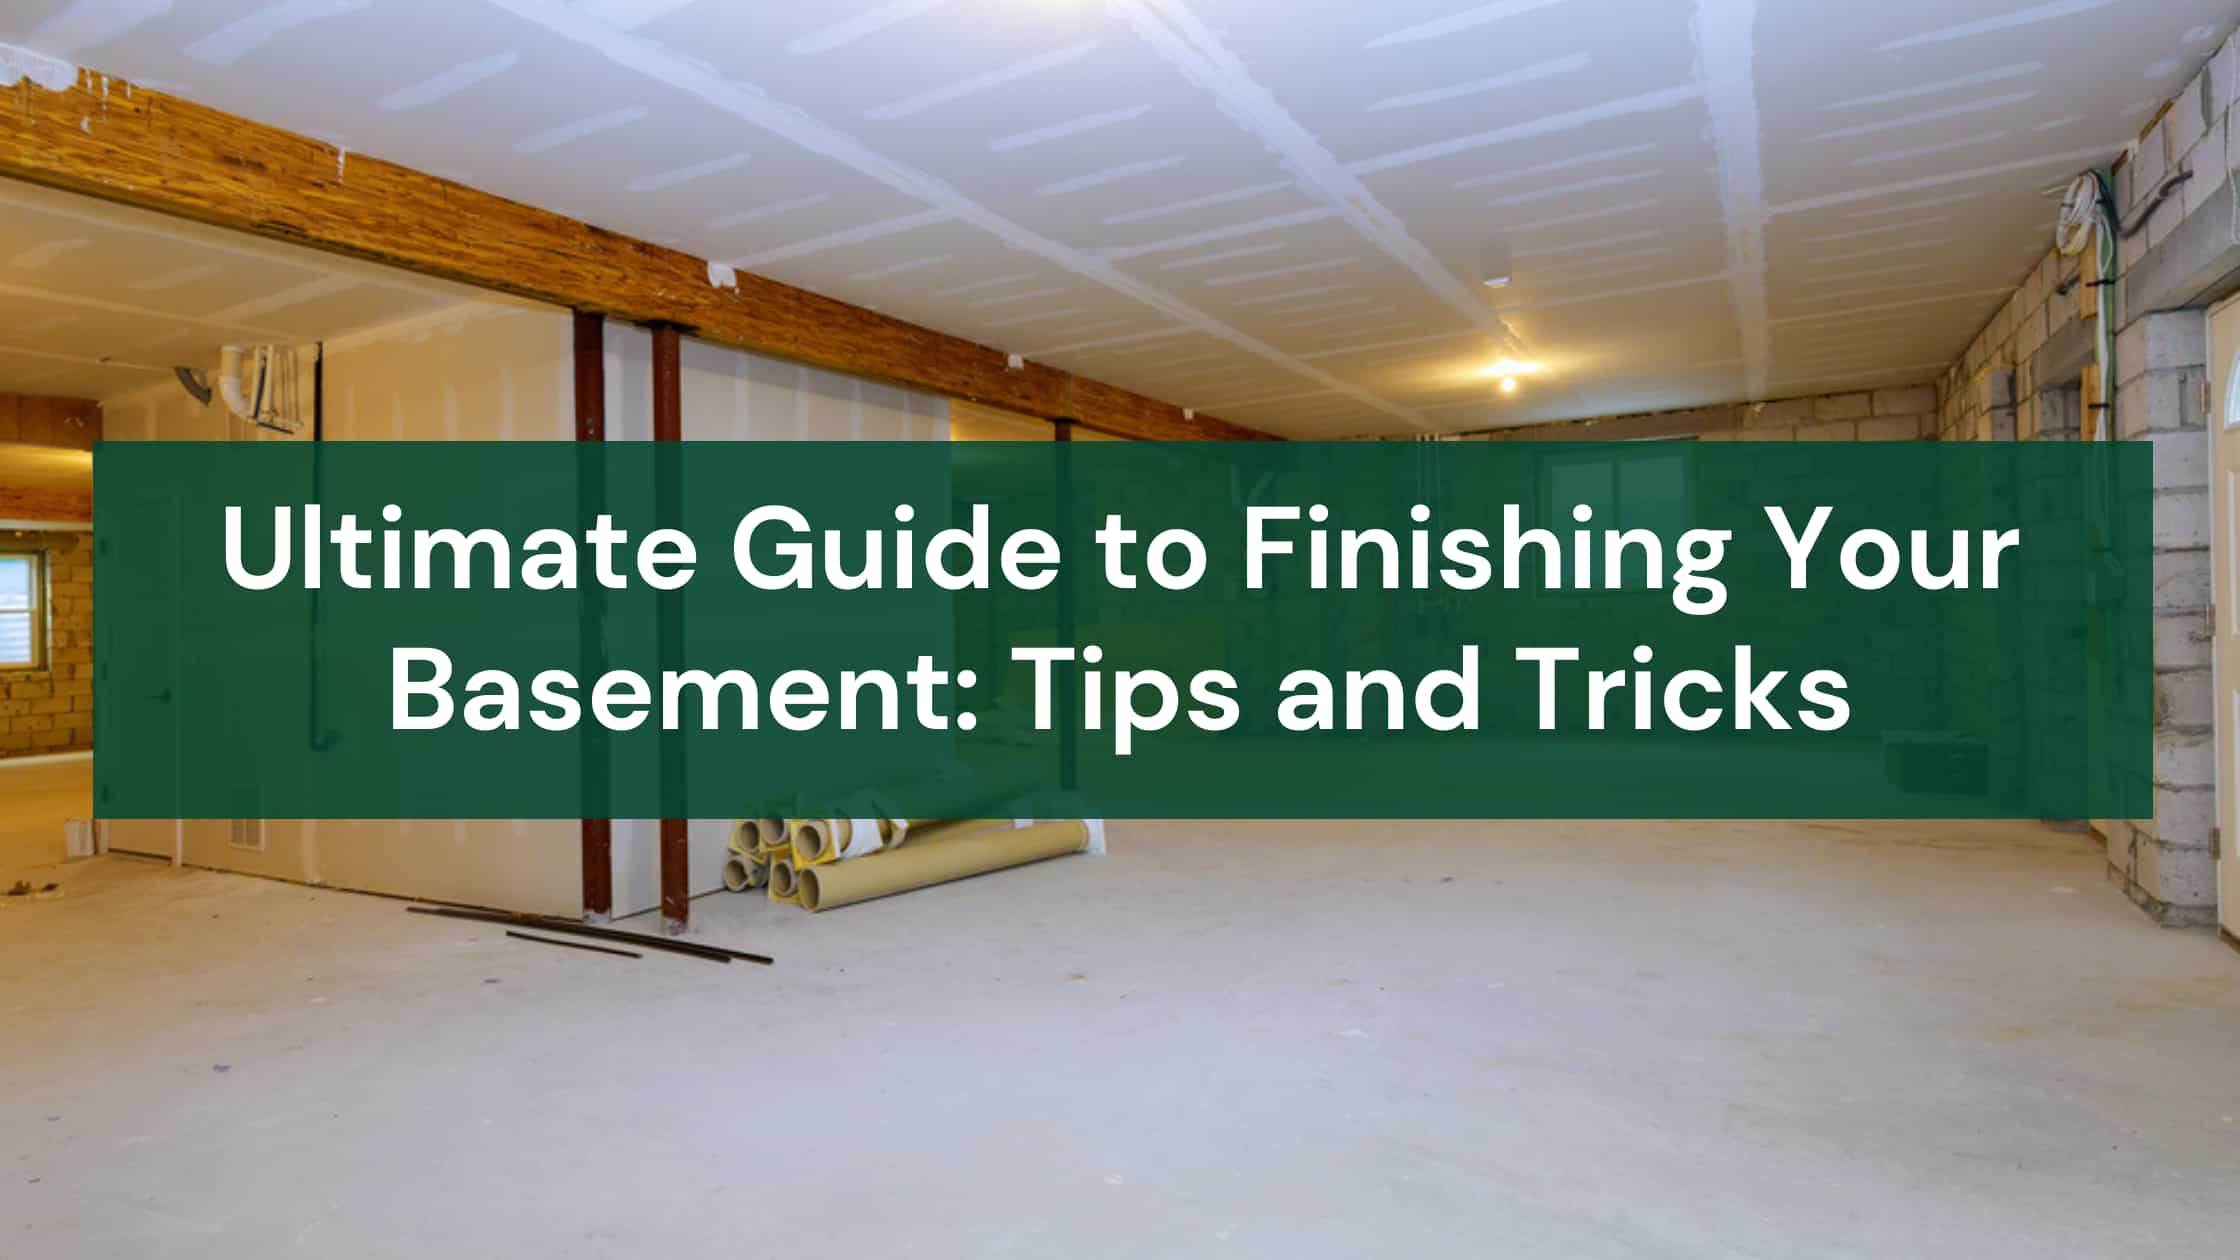 Ultimate Guide to Finishing Your Basement Tips and Tricks